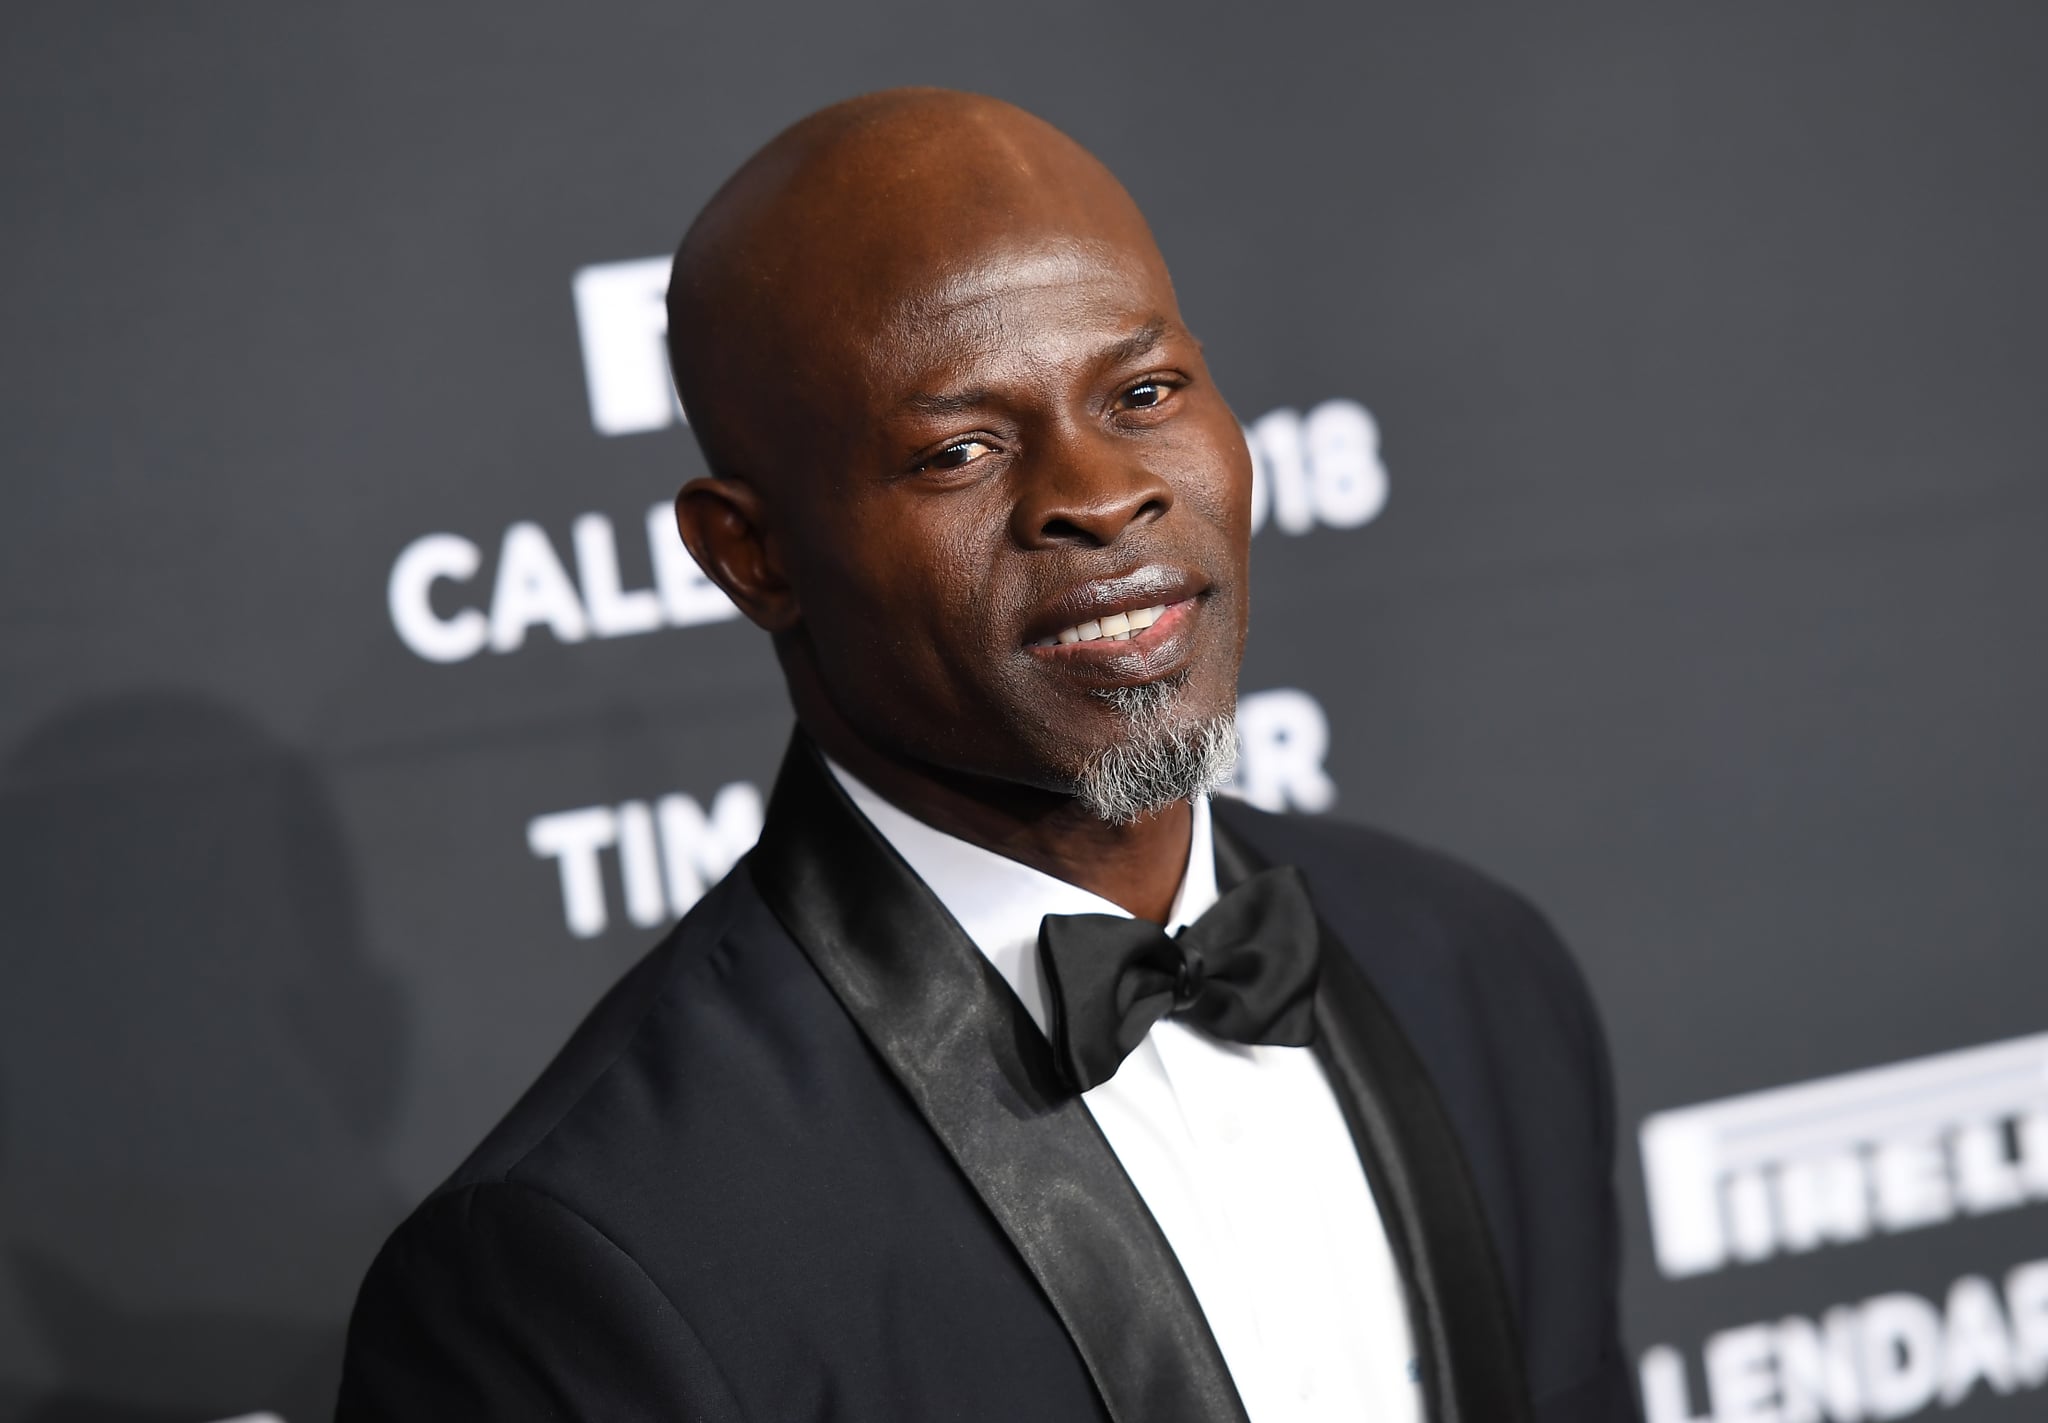 Djimon Hounsou attends the 2018 Pirelli Calendar Launch Gala at Manhattan Center on November 10, 2017 in New York City. / AFP PHOTO / ANGELA WEISS        (Photo credit should read ANGELA WEISS/AFP/Getty Images)